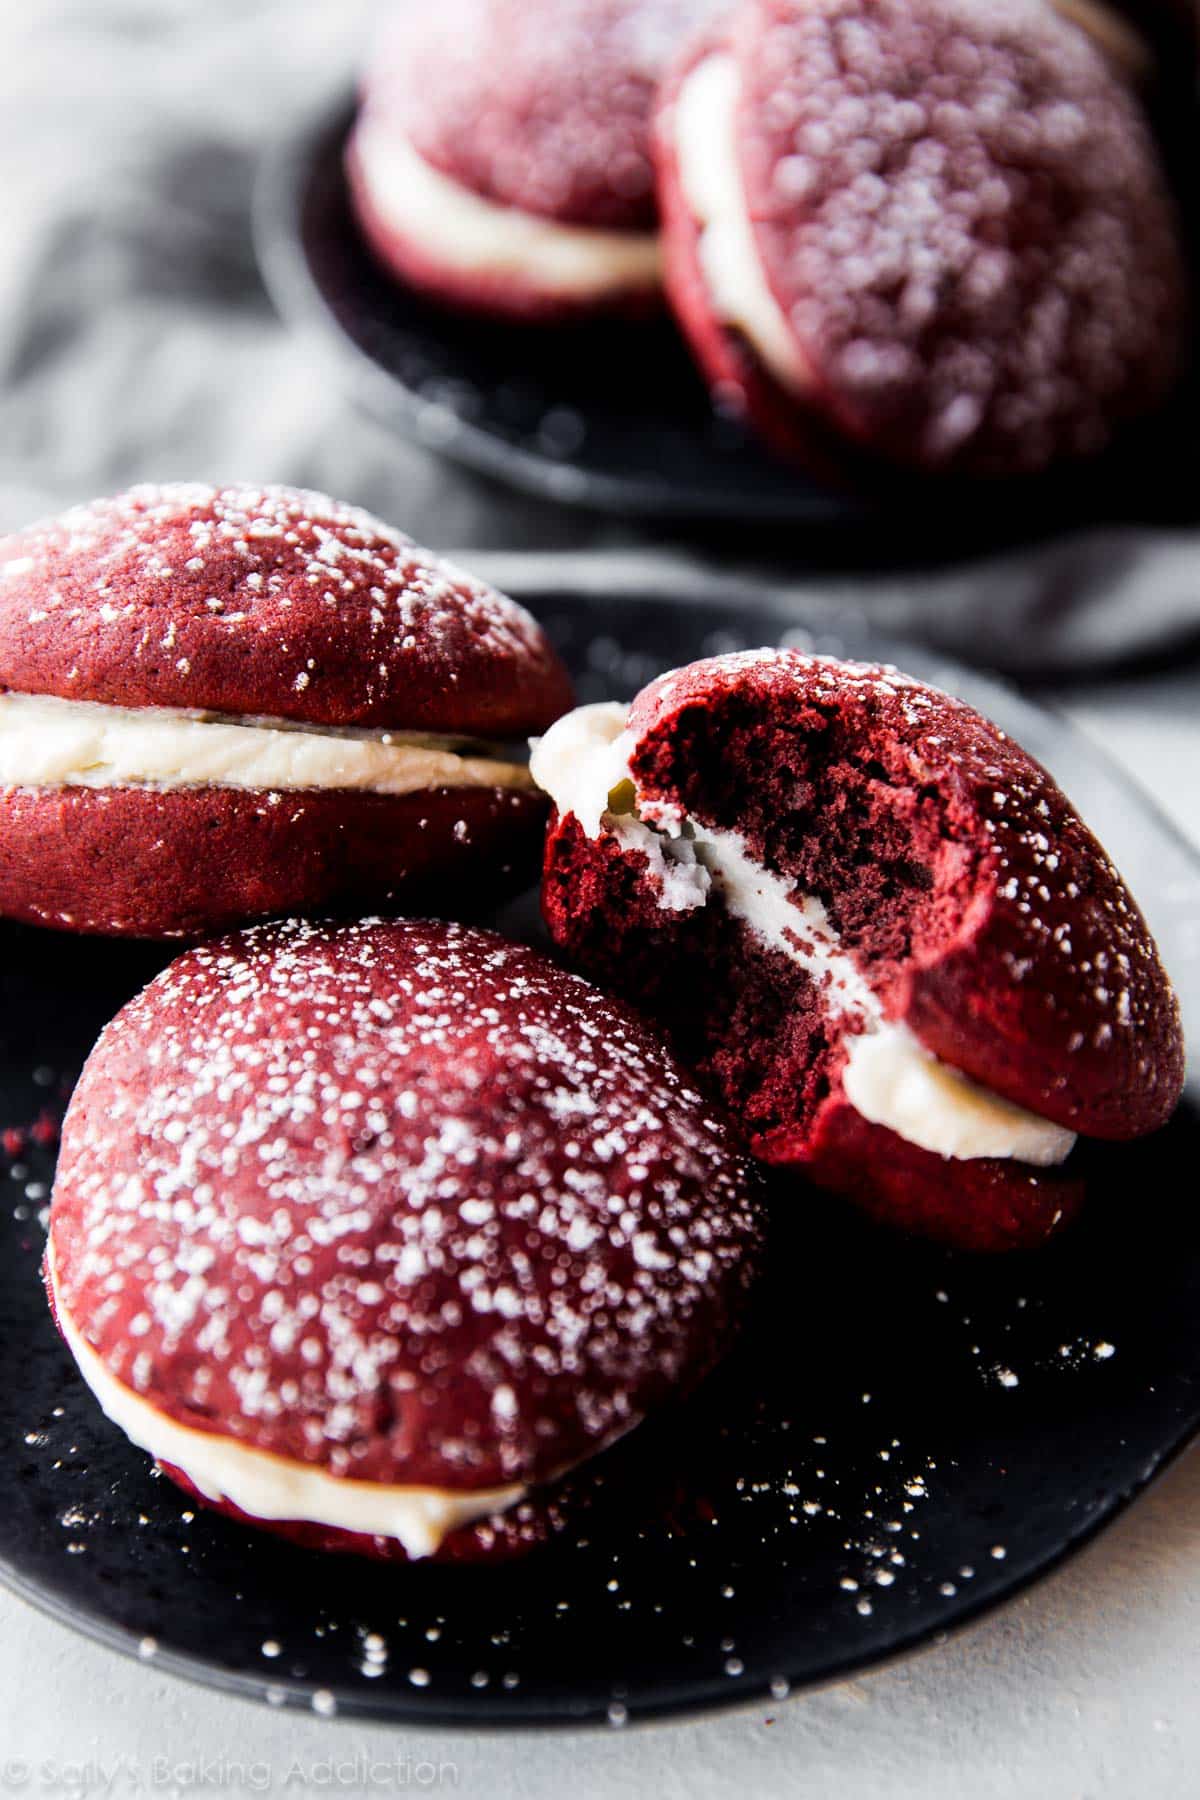 red velvet whoopie pies on a black plate with a bite taken from one whoopie pie